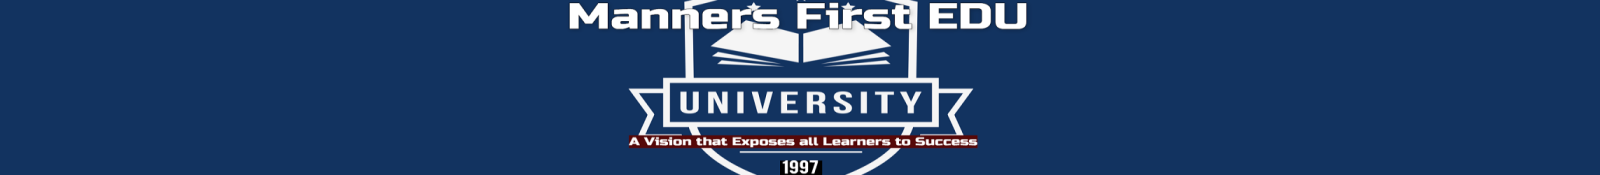 Manners First University